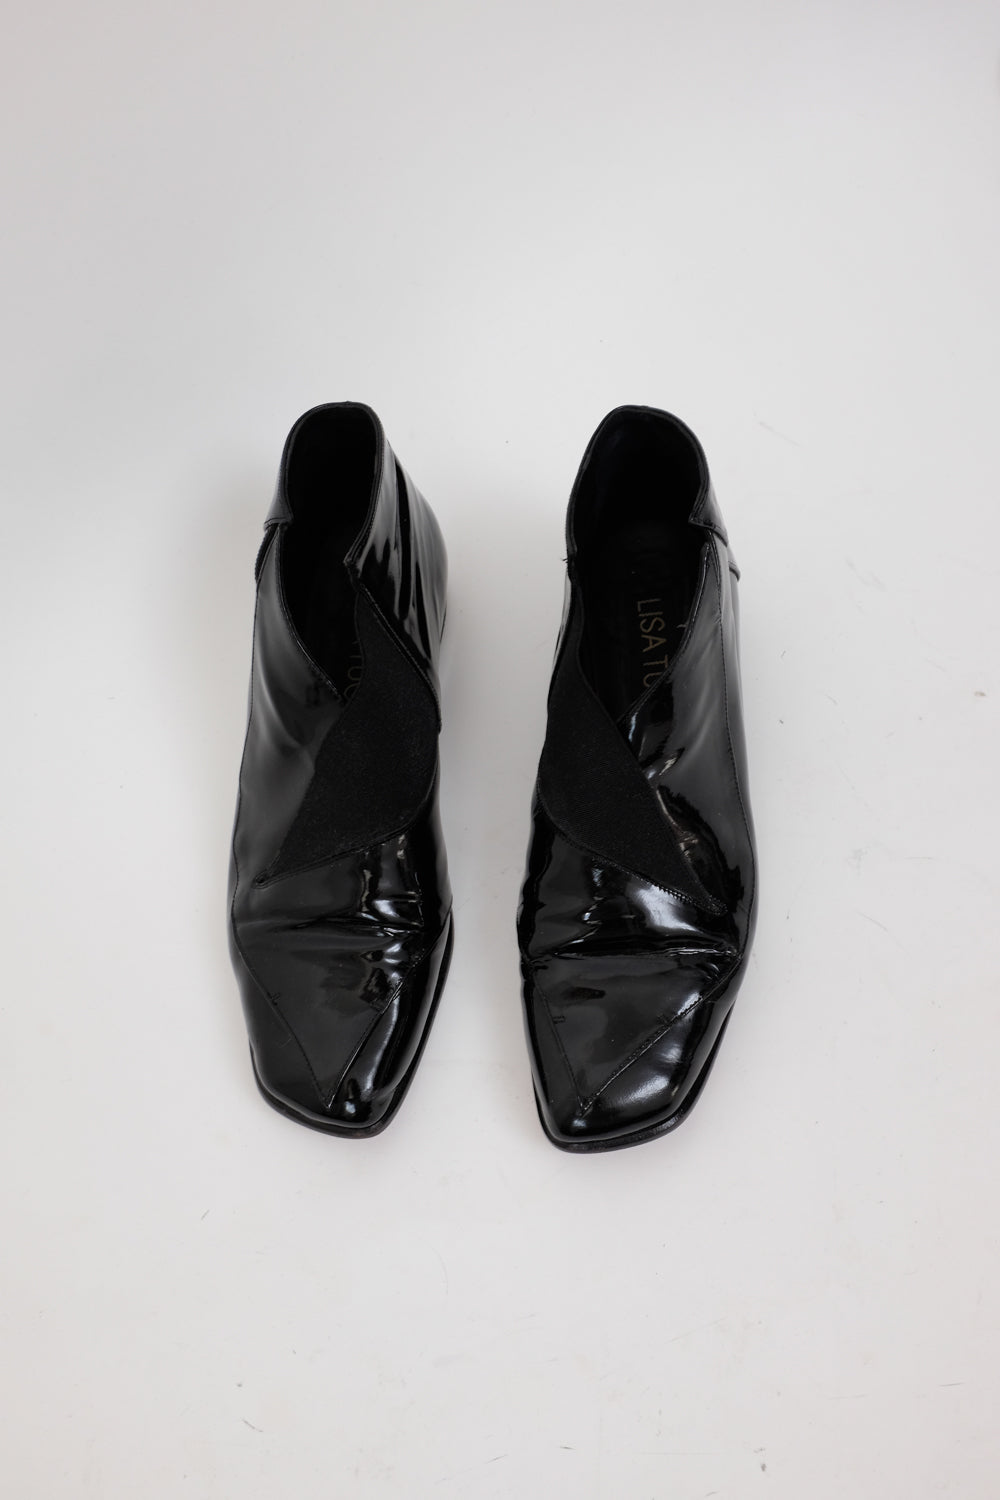 SPECIAL VINTAGE ITALY BLACK 39 PATENT LEATHER BOOTS